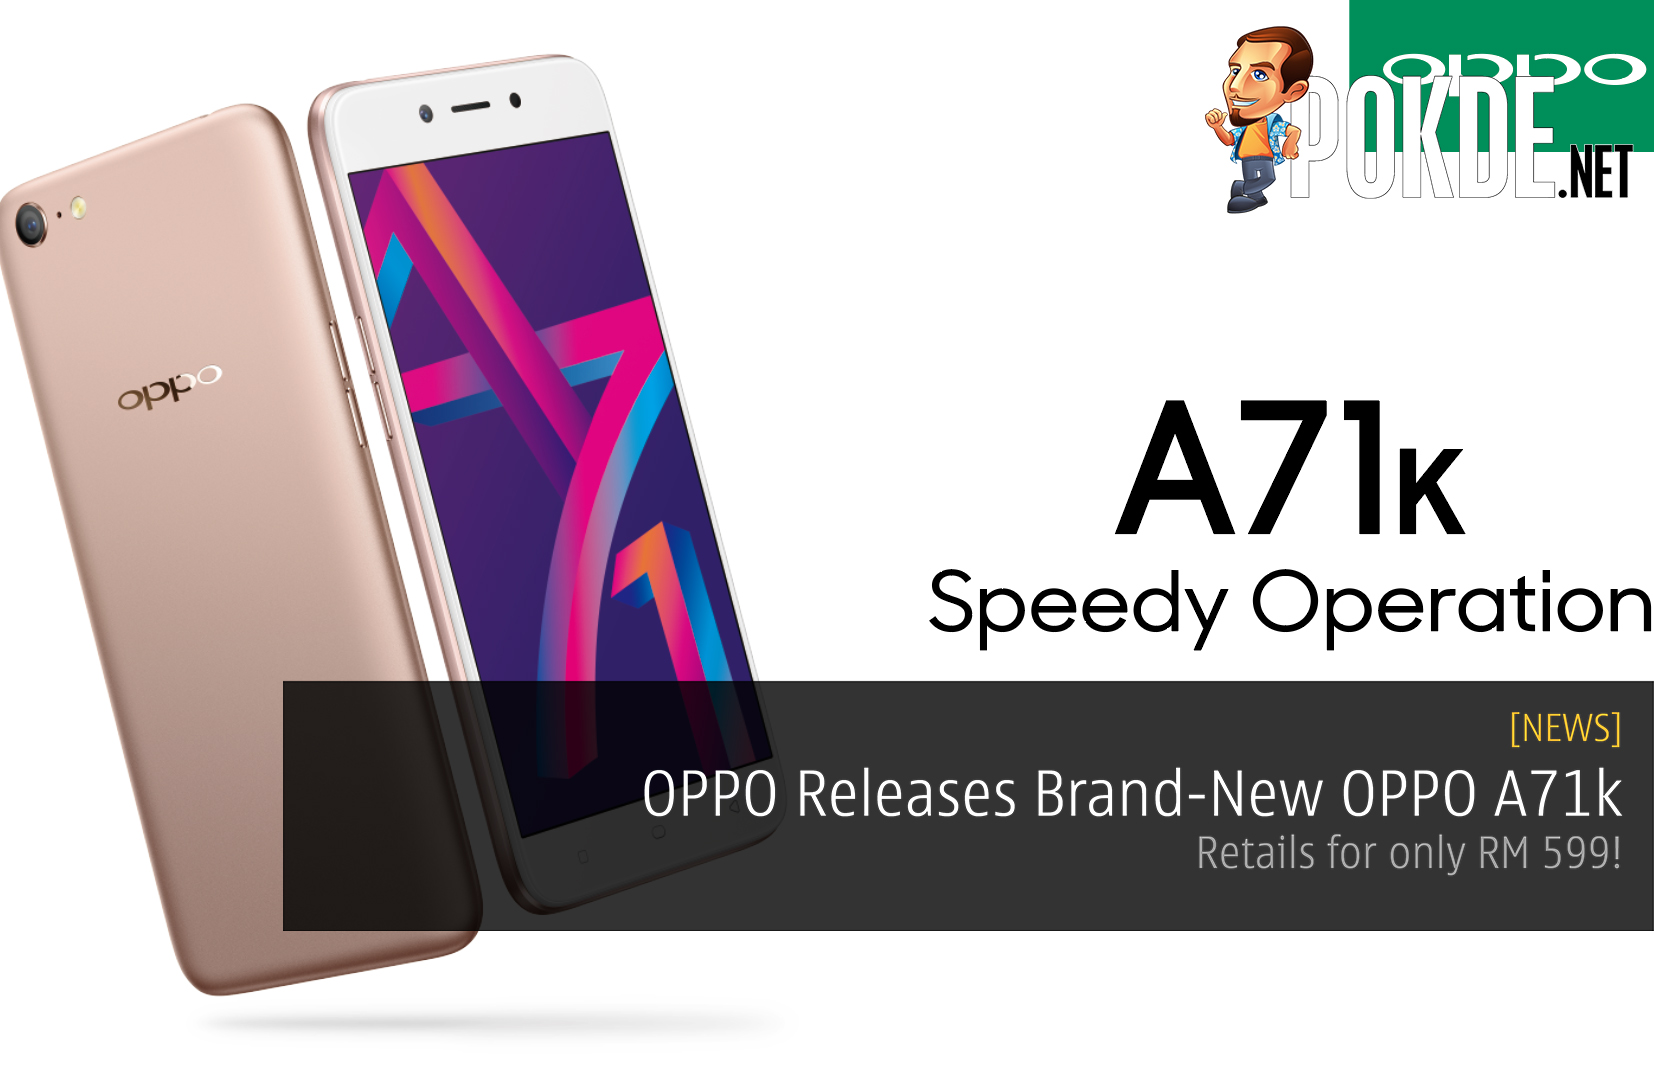 OPPO Releases Brand-New OPPO A71k - Retails for only RM 599! 42